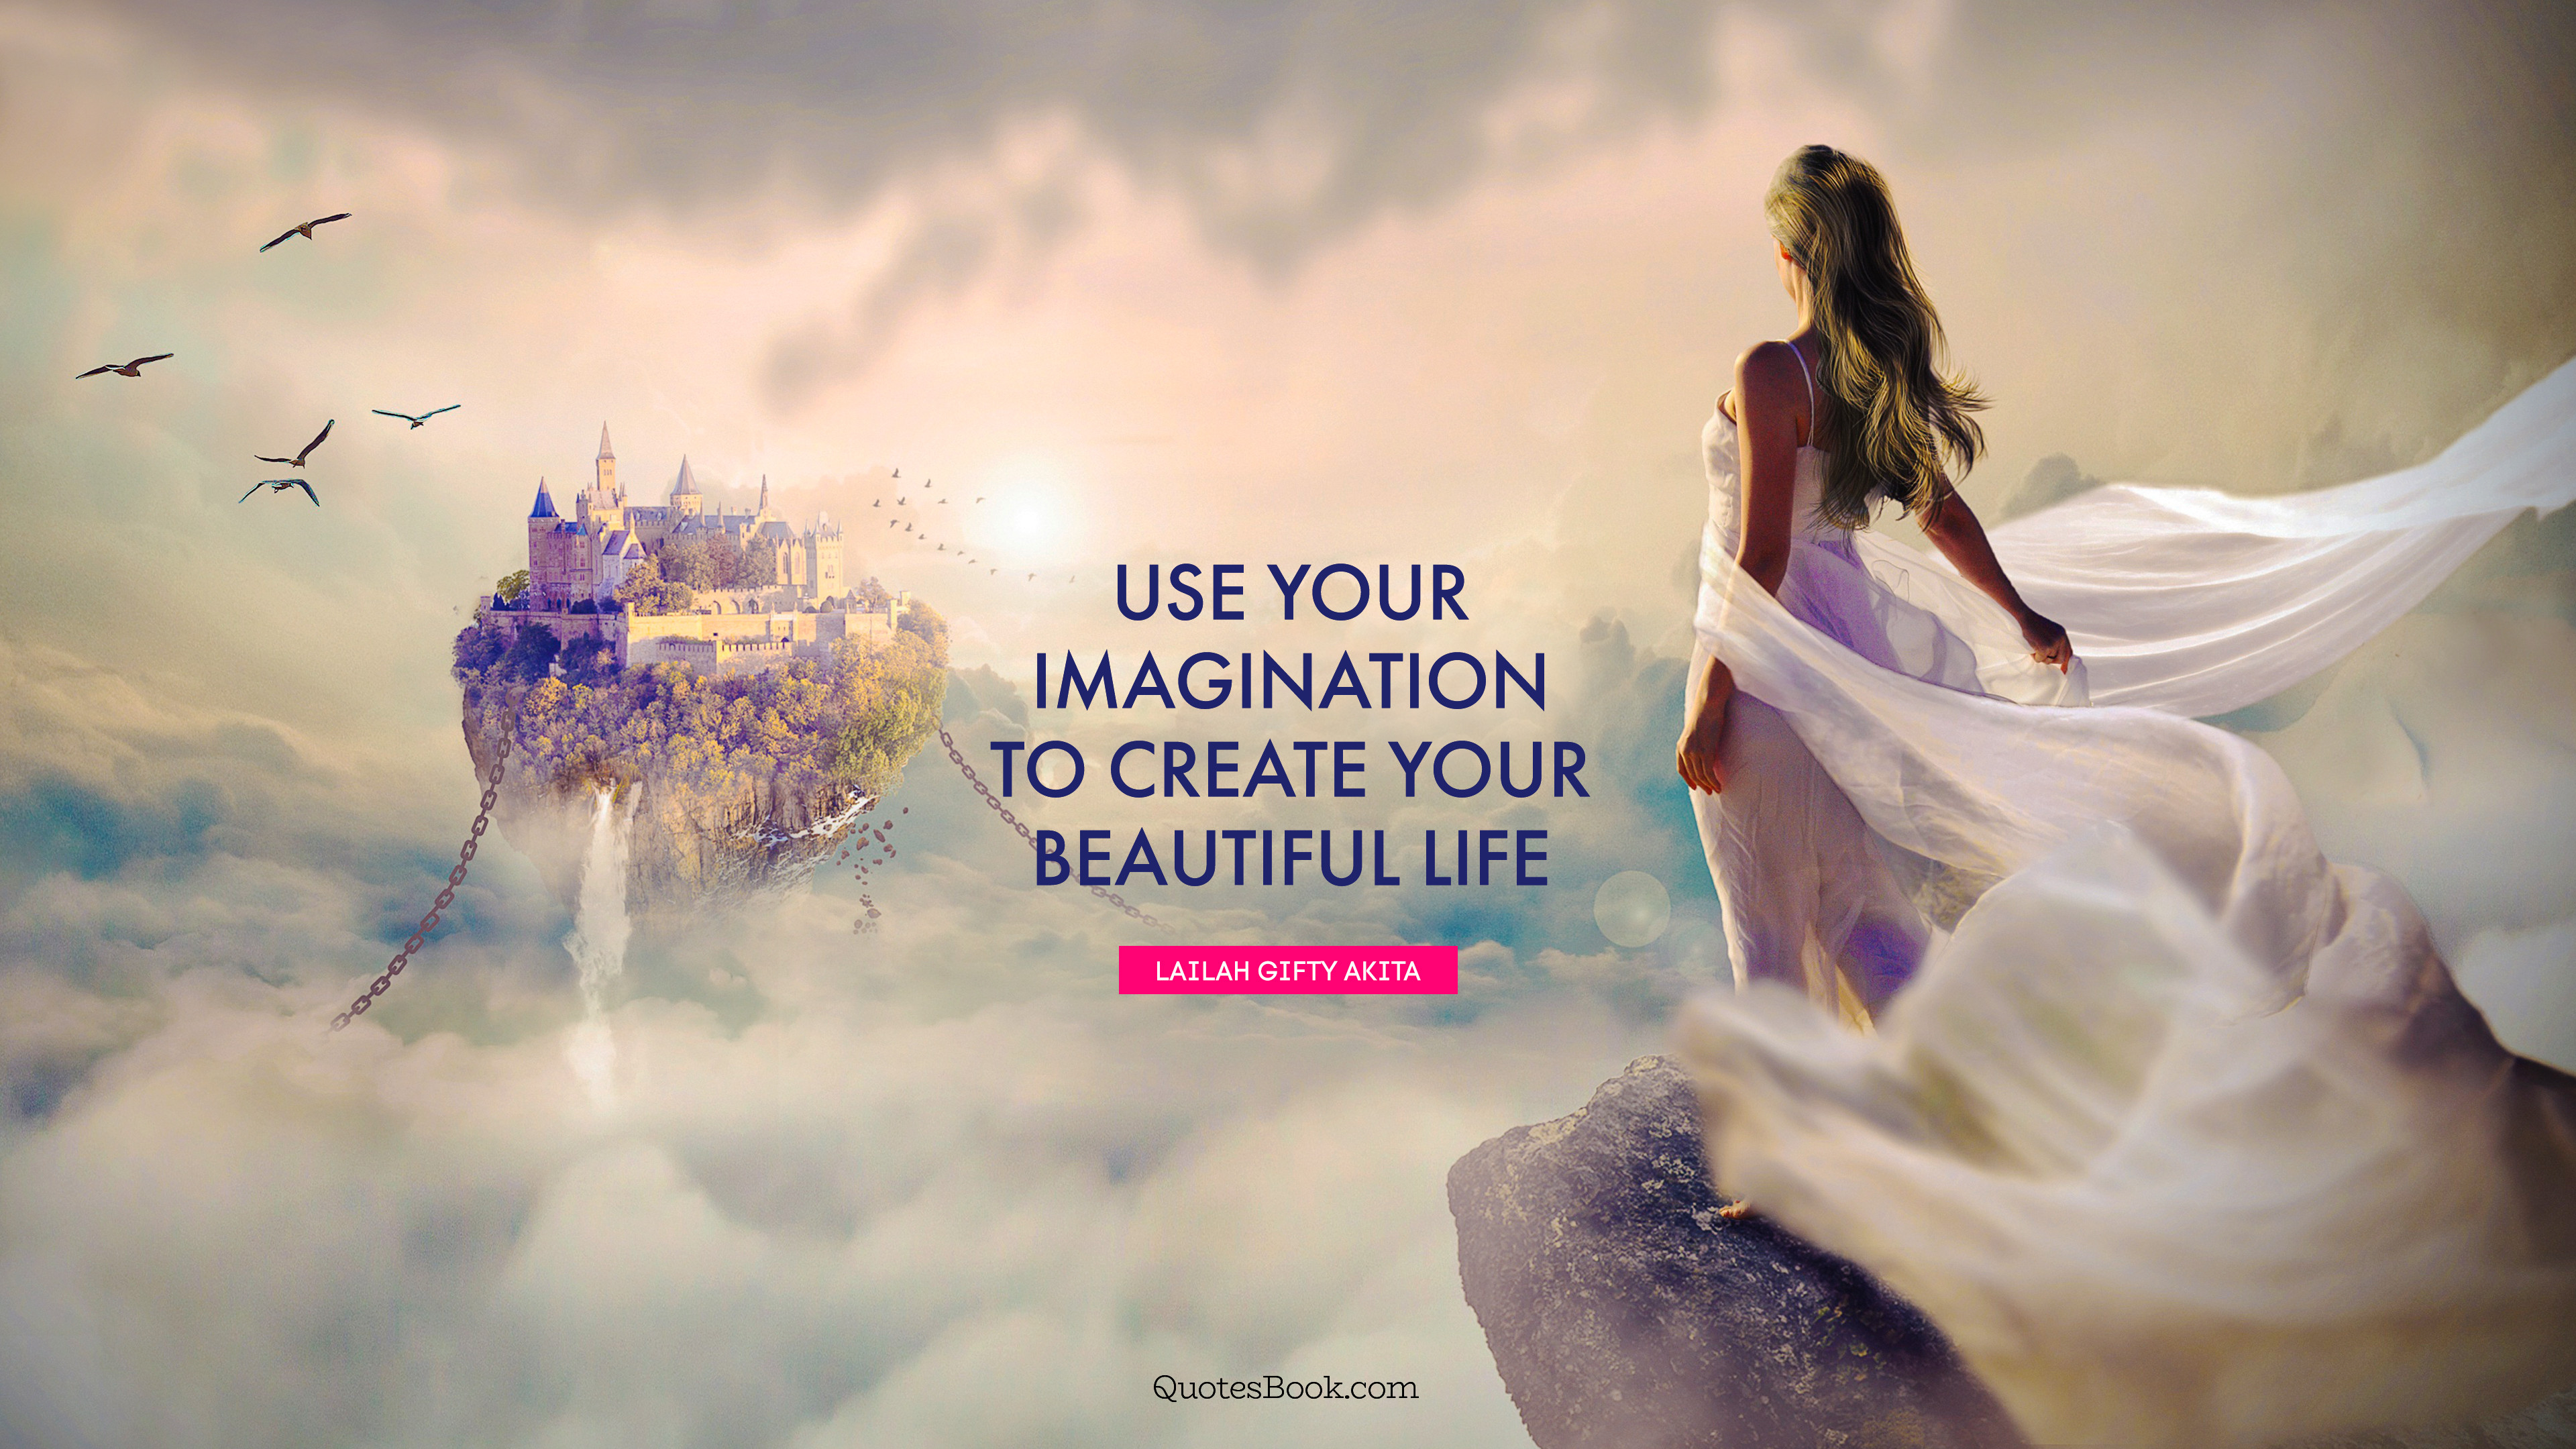 Use your imagination to create your beautiful life. - Quote by Lailah